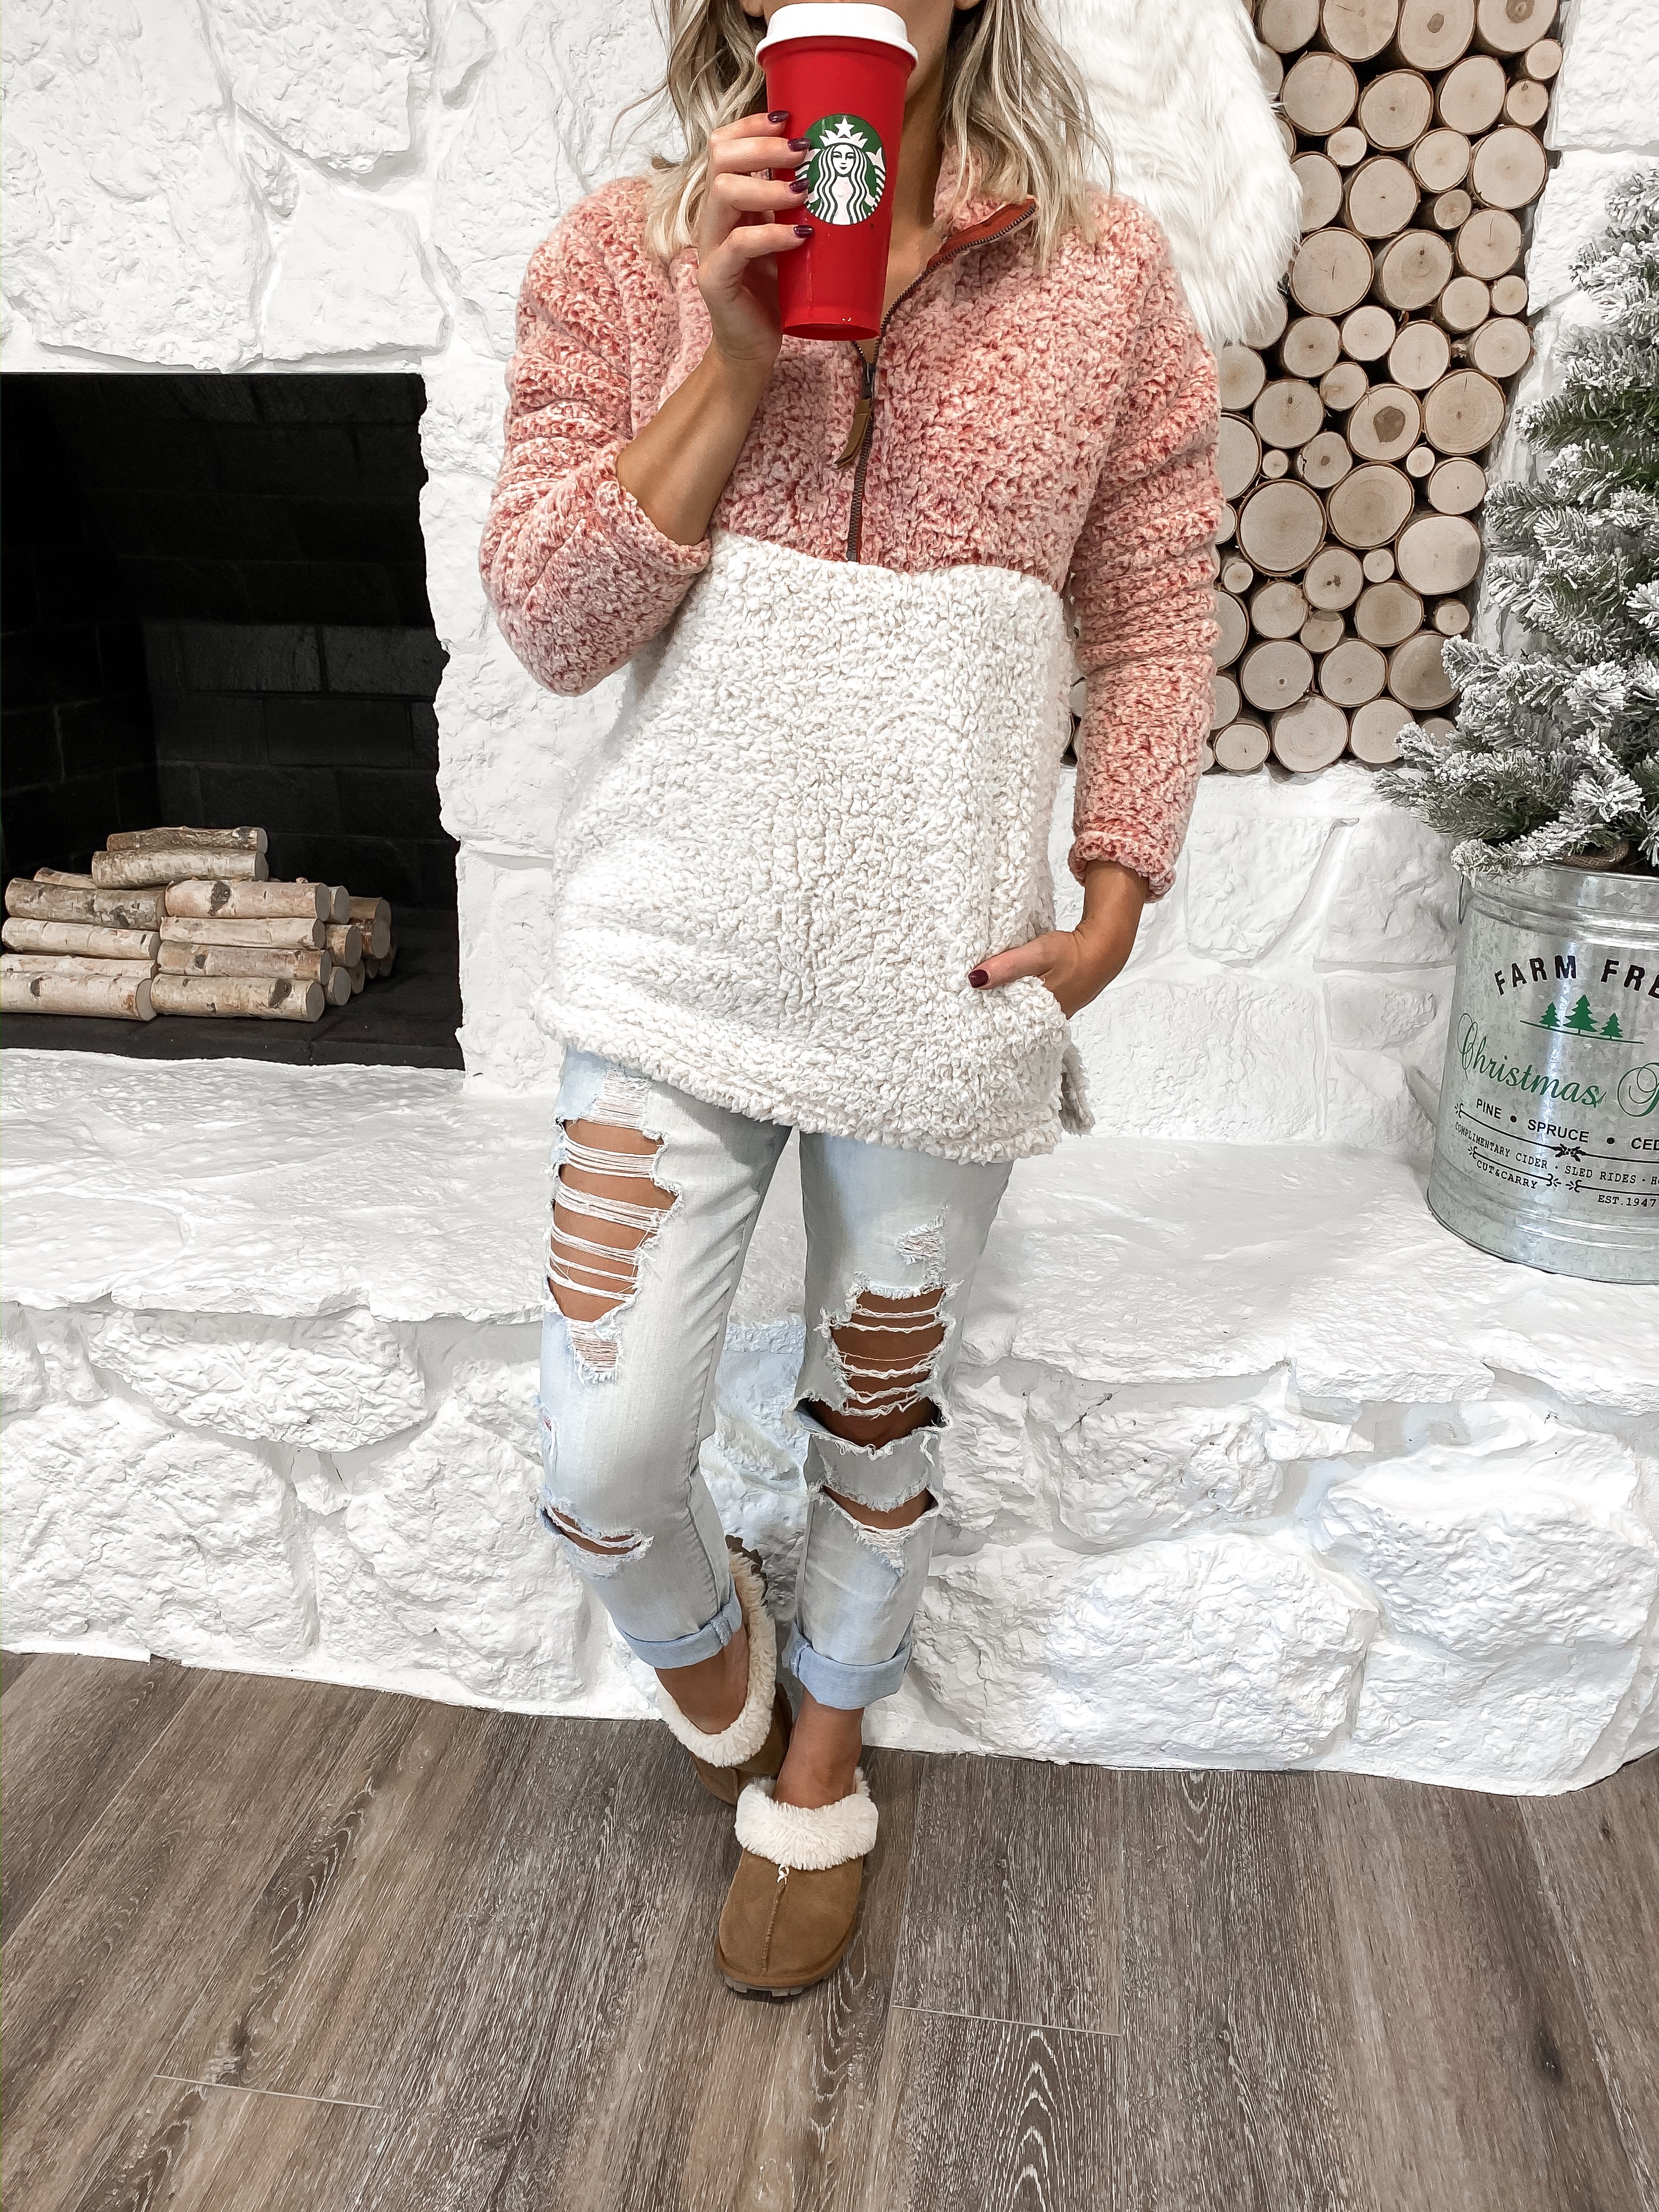 laura beverlin comfy casual outfit under $30 Farmhouse christmas home decor wood stacked fireplace5